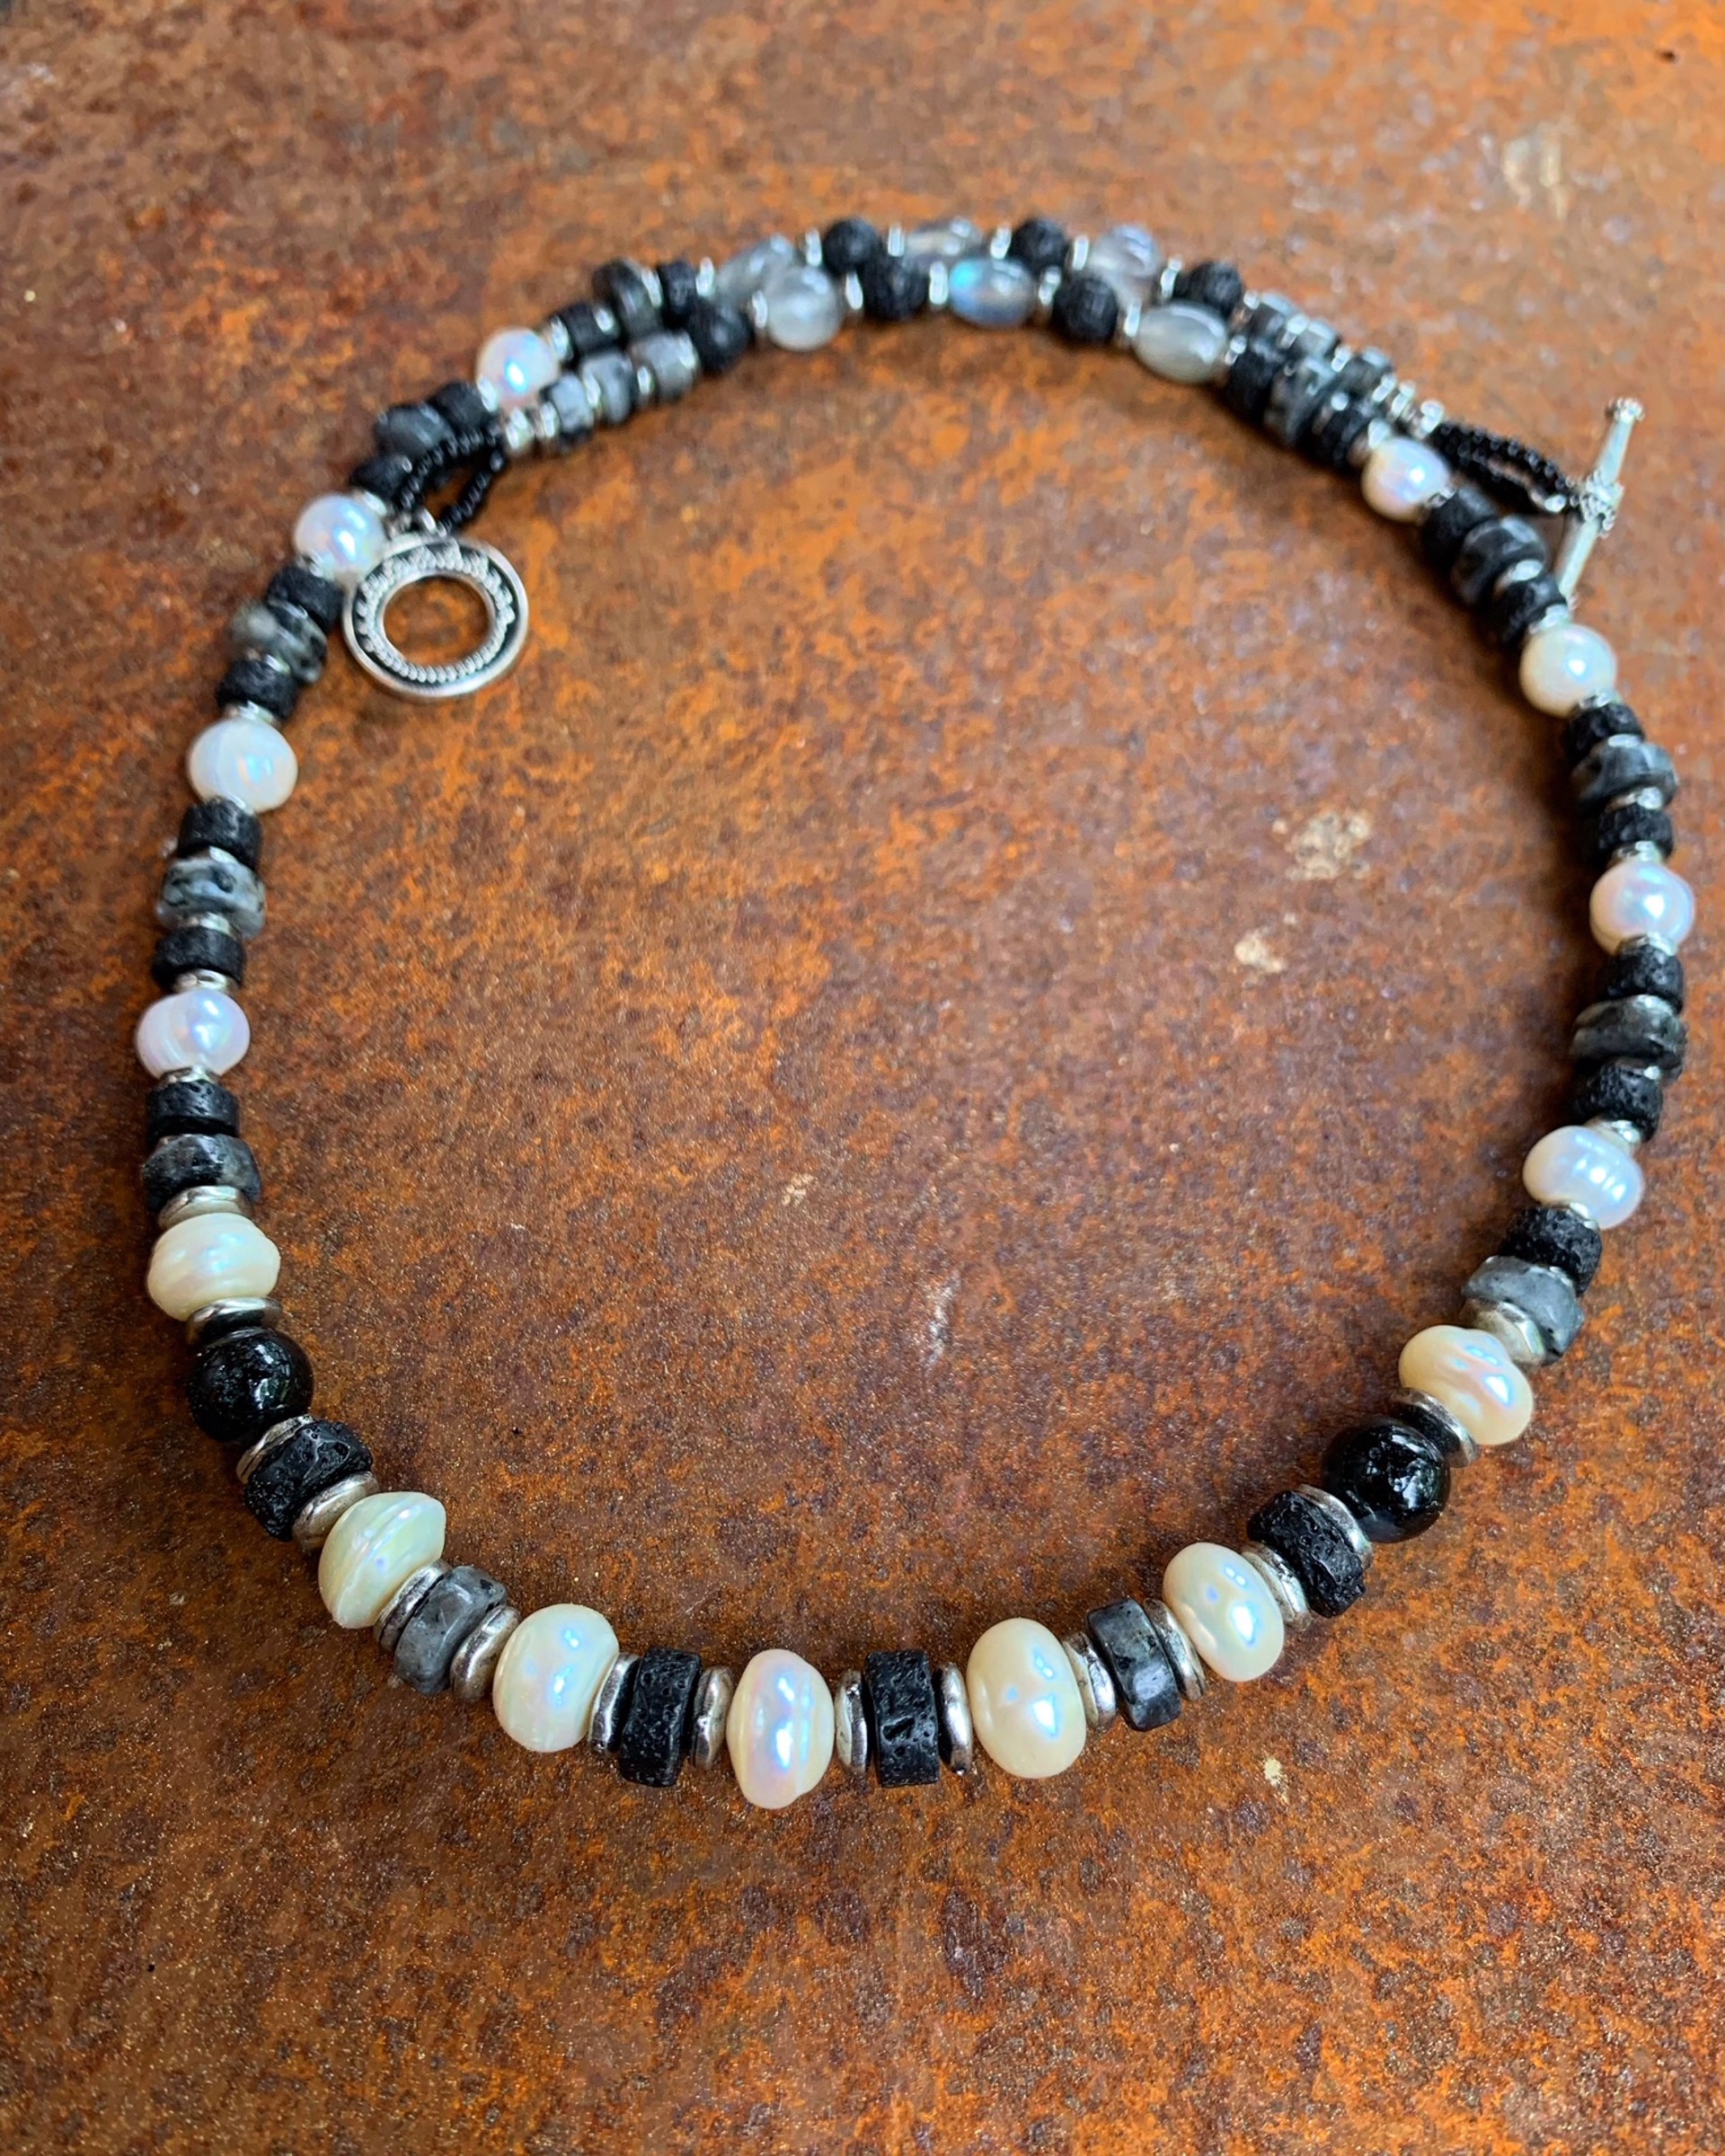 K856 Cultured Pearl Necklace with Labradorite and Lava by Kelly Ormsby